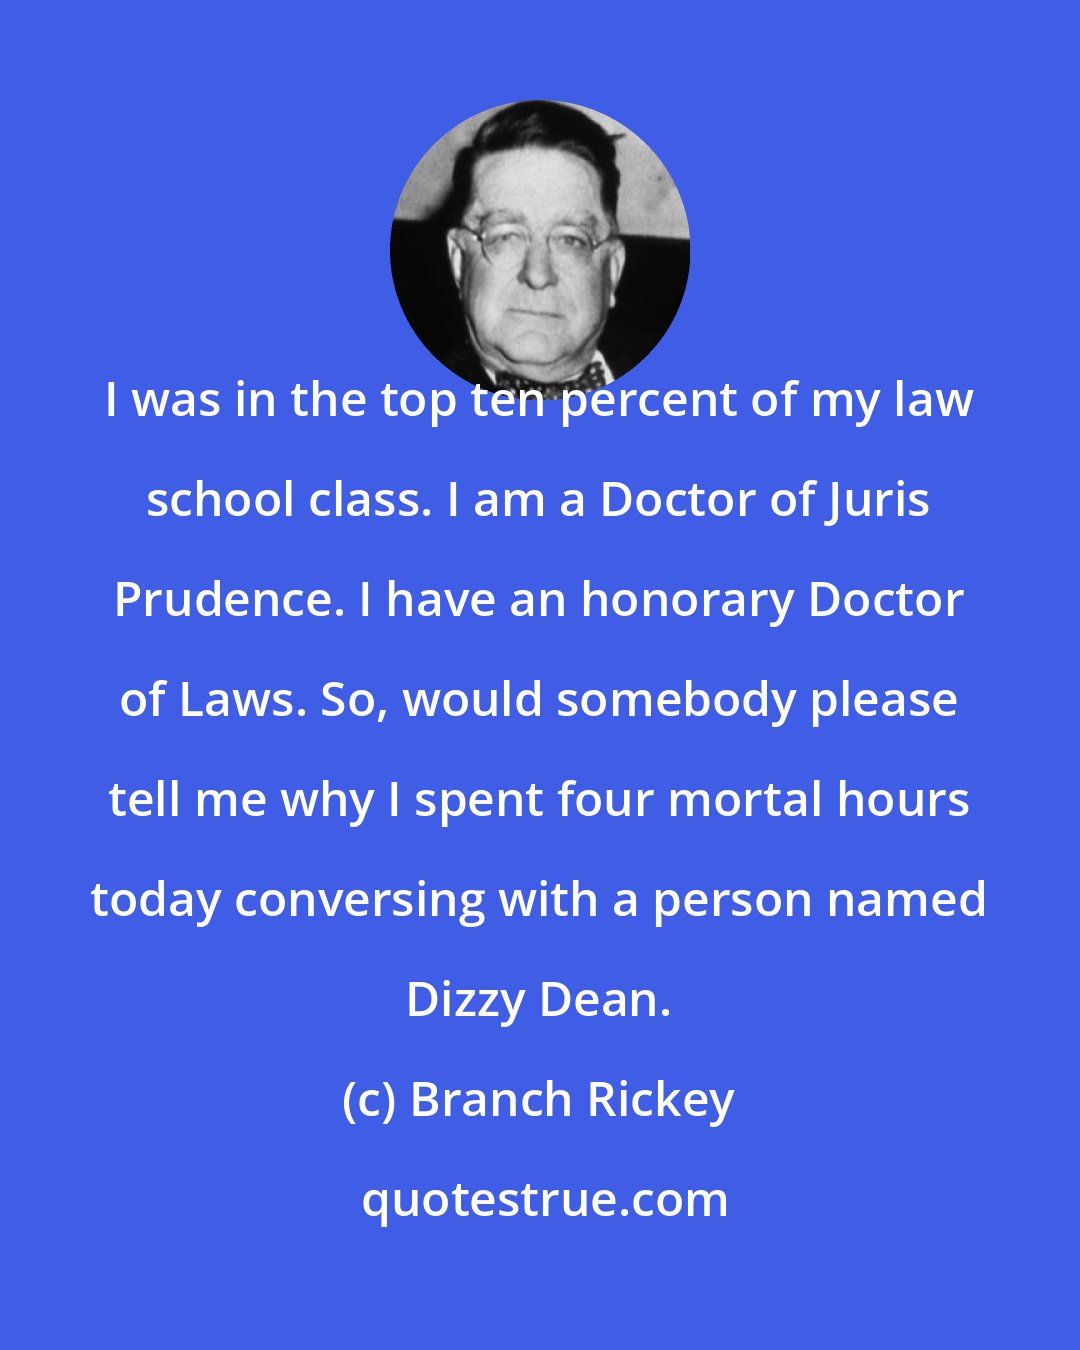 Branch Rickey: I was in the top ten percent of my law school class. I am a Doctor of Juris Prudence. I have an honorary Doctor of Laws. So, would somebody please tell me why I spent four mortal hours today conversing with a person named Dizzy Dean.